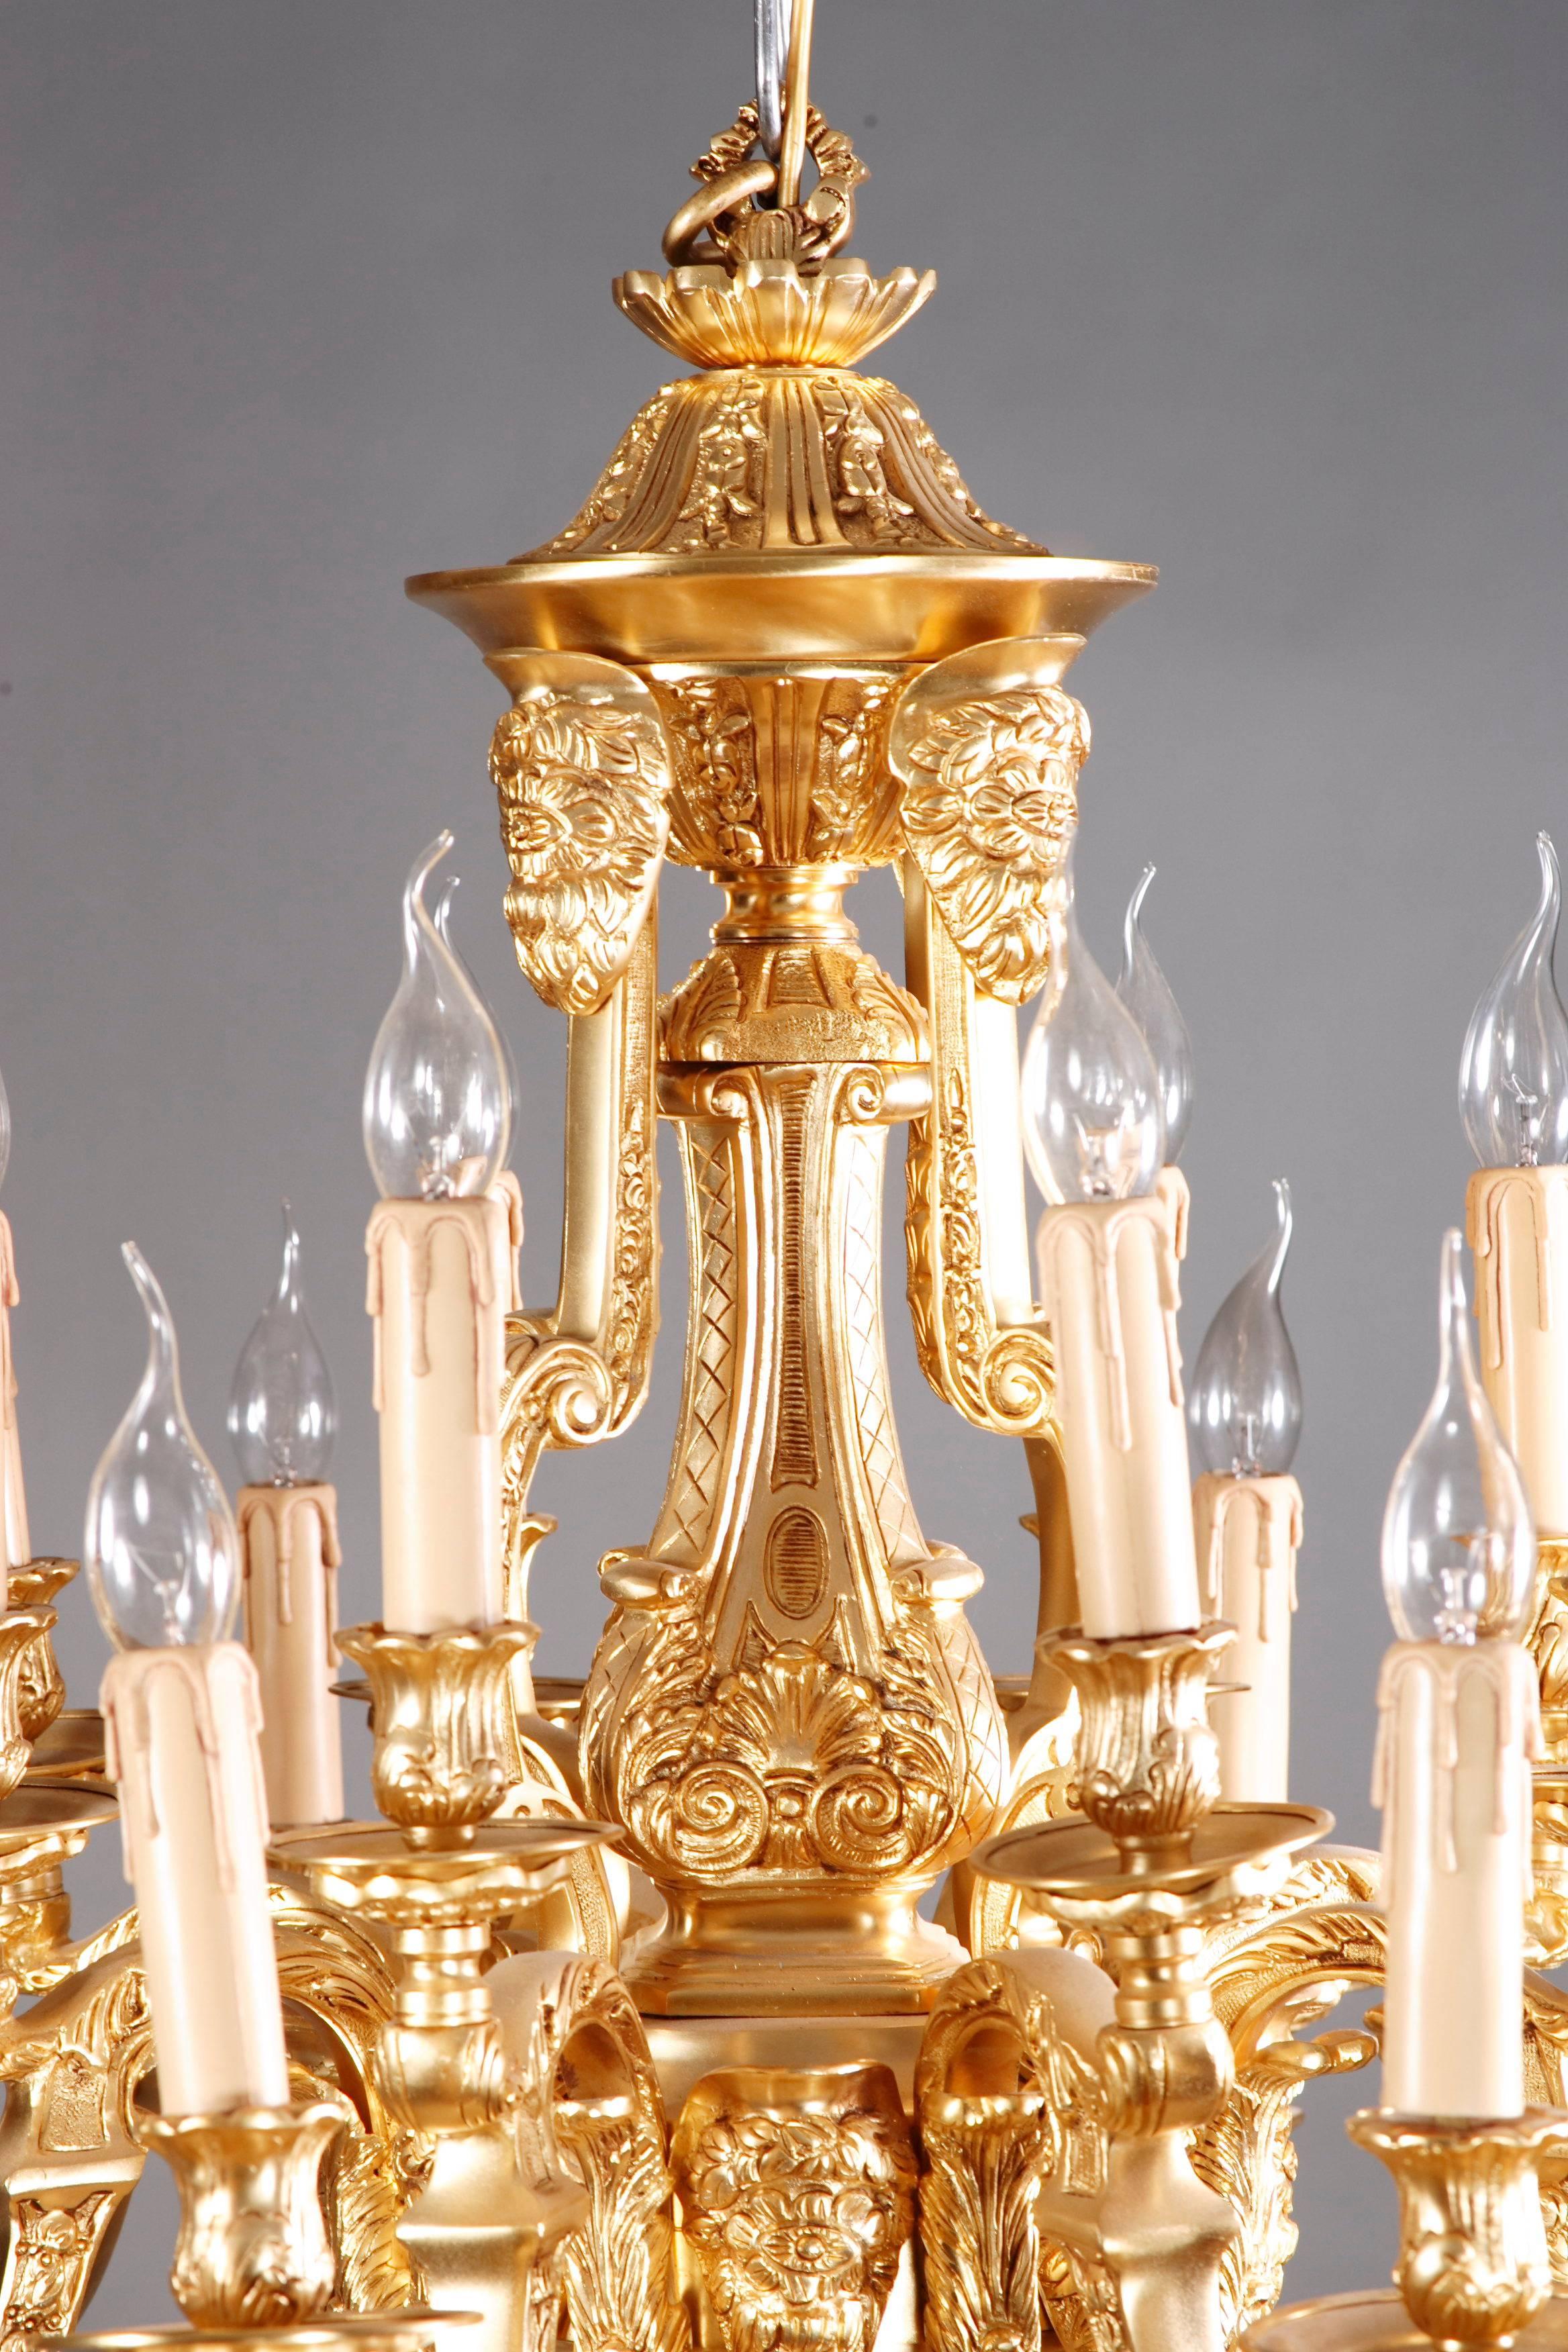 Bronze 20th Century Classic French Chandelier in Louis Seize Style